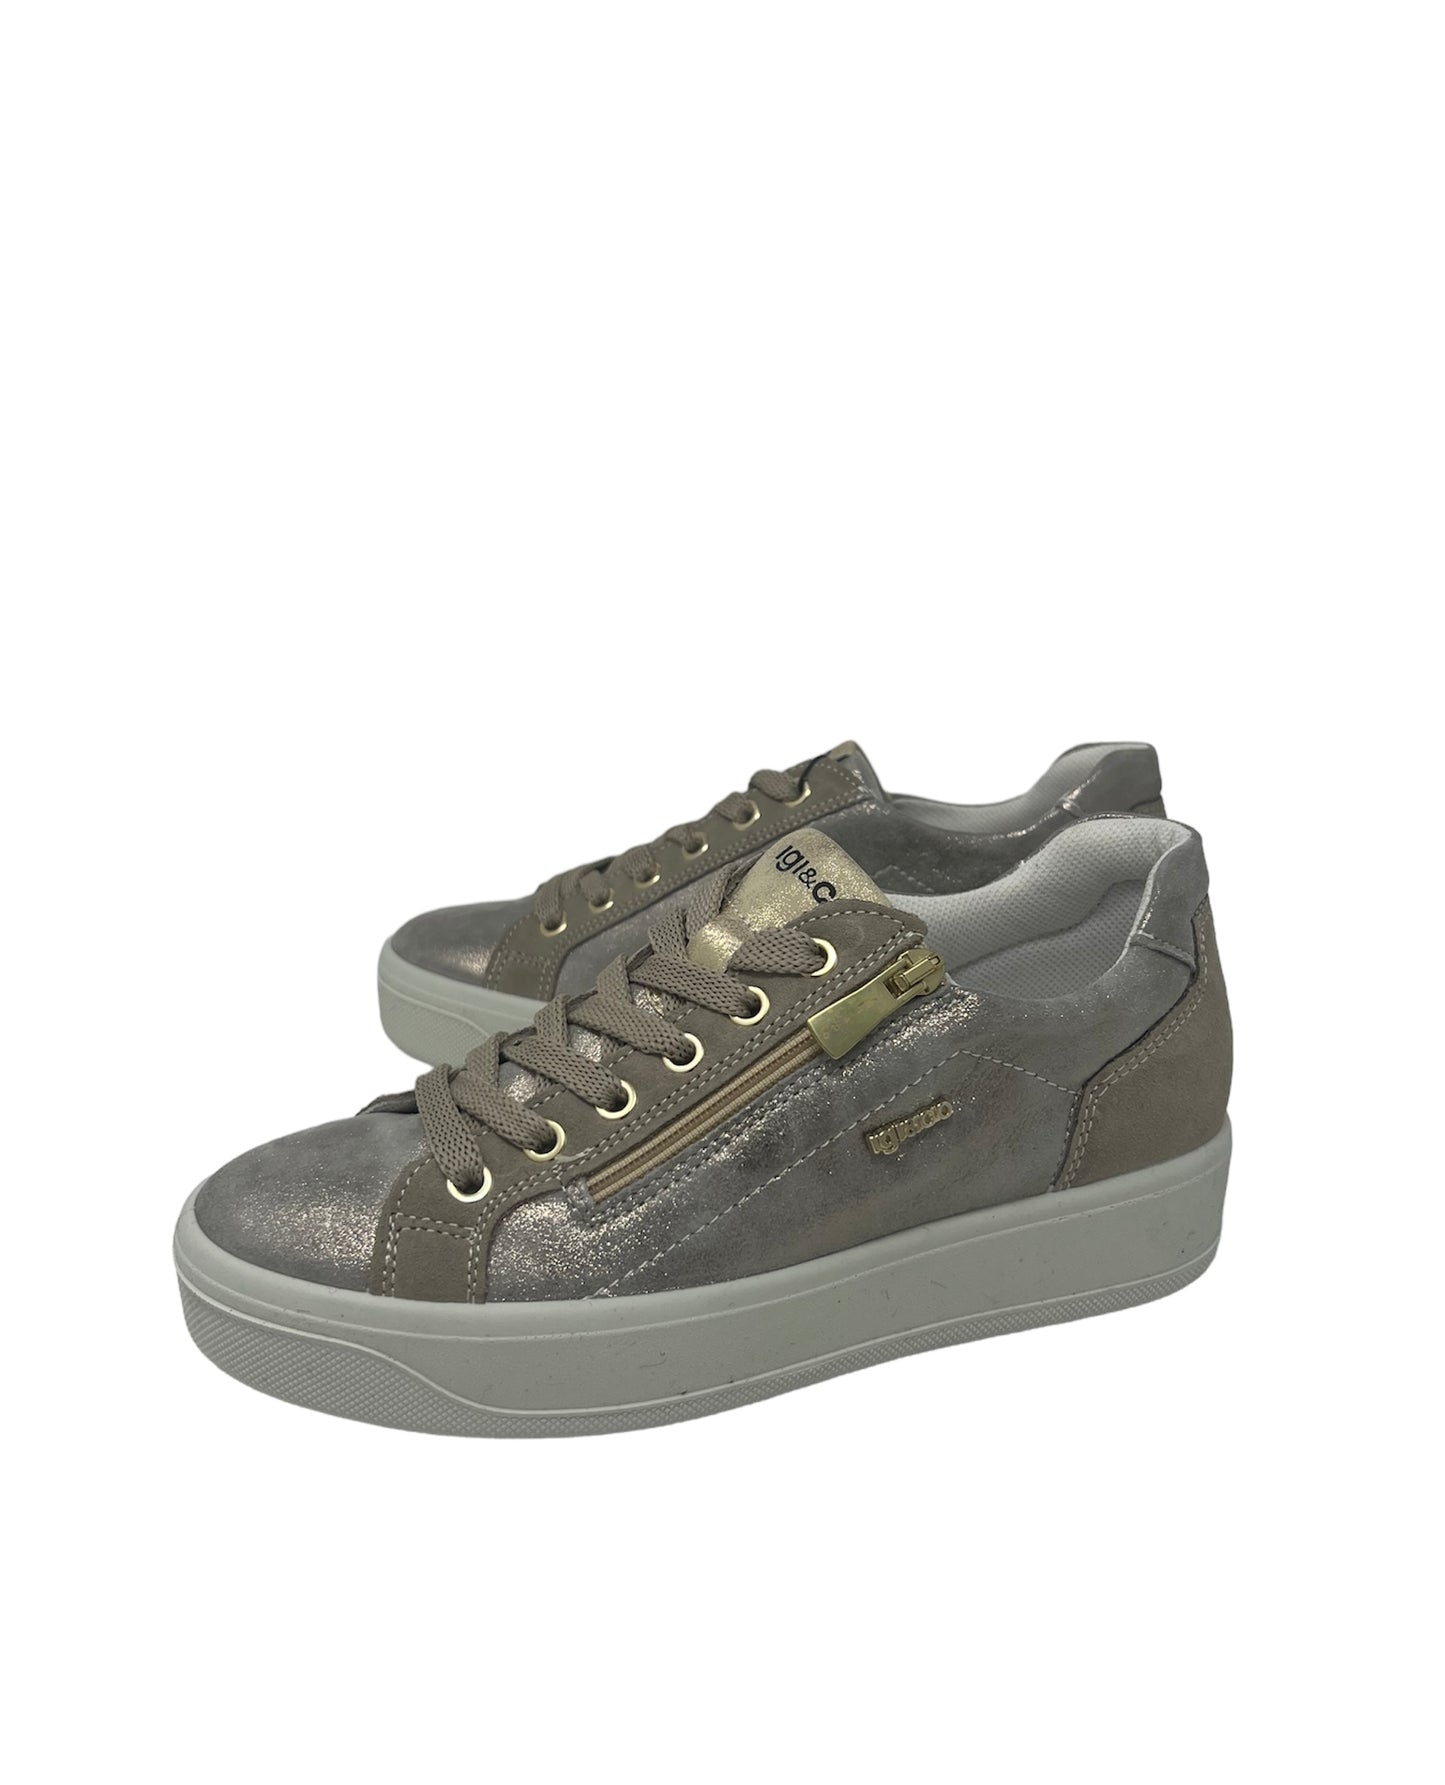 Sneakers in camoscio taupe Igi&co -3657422